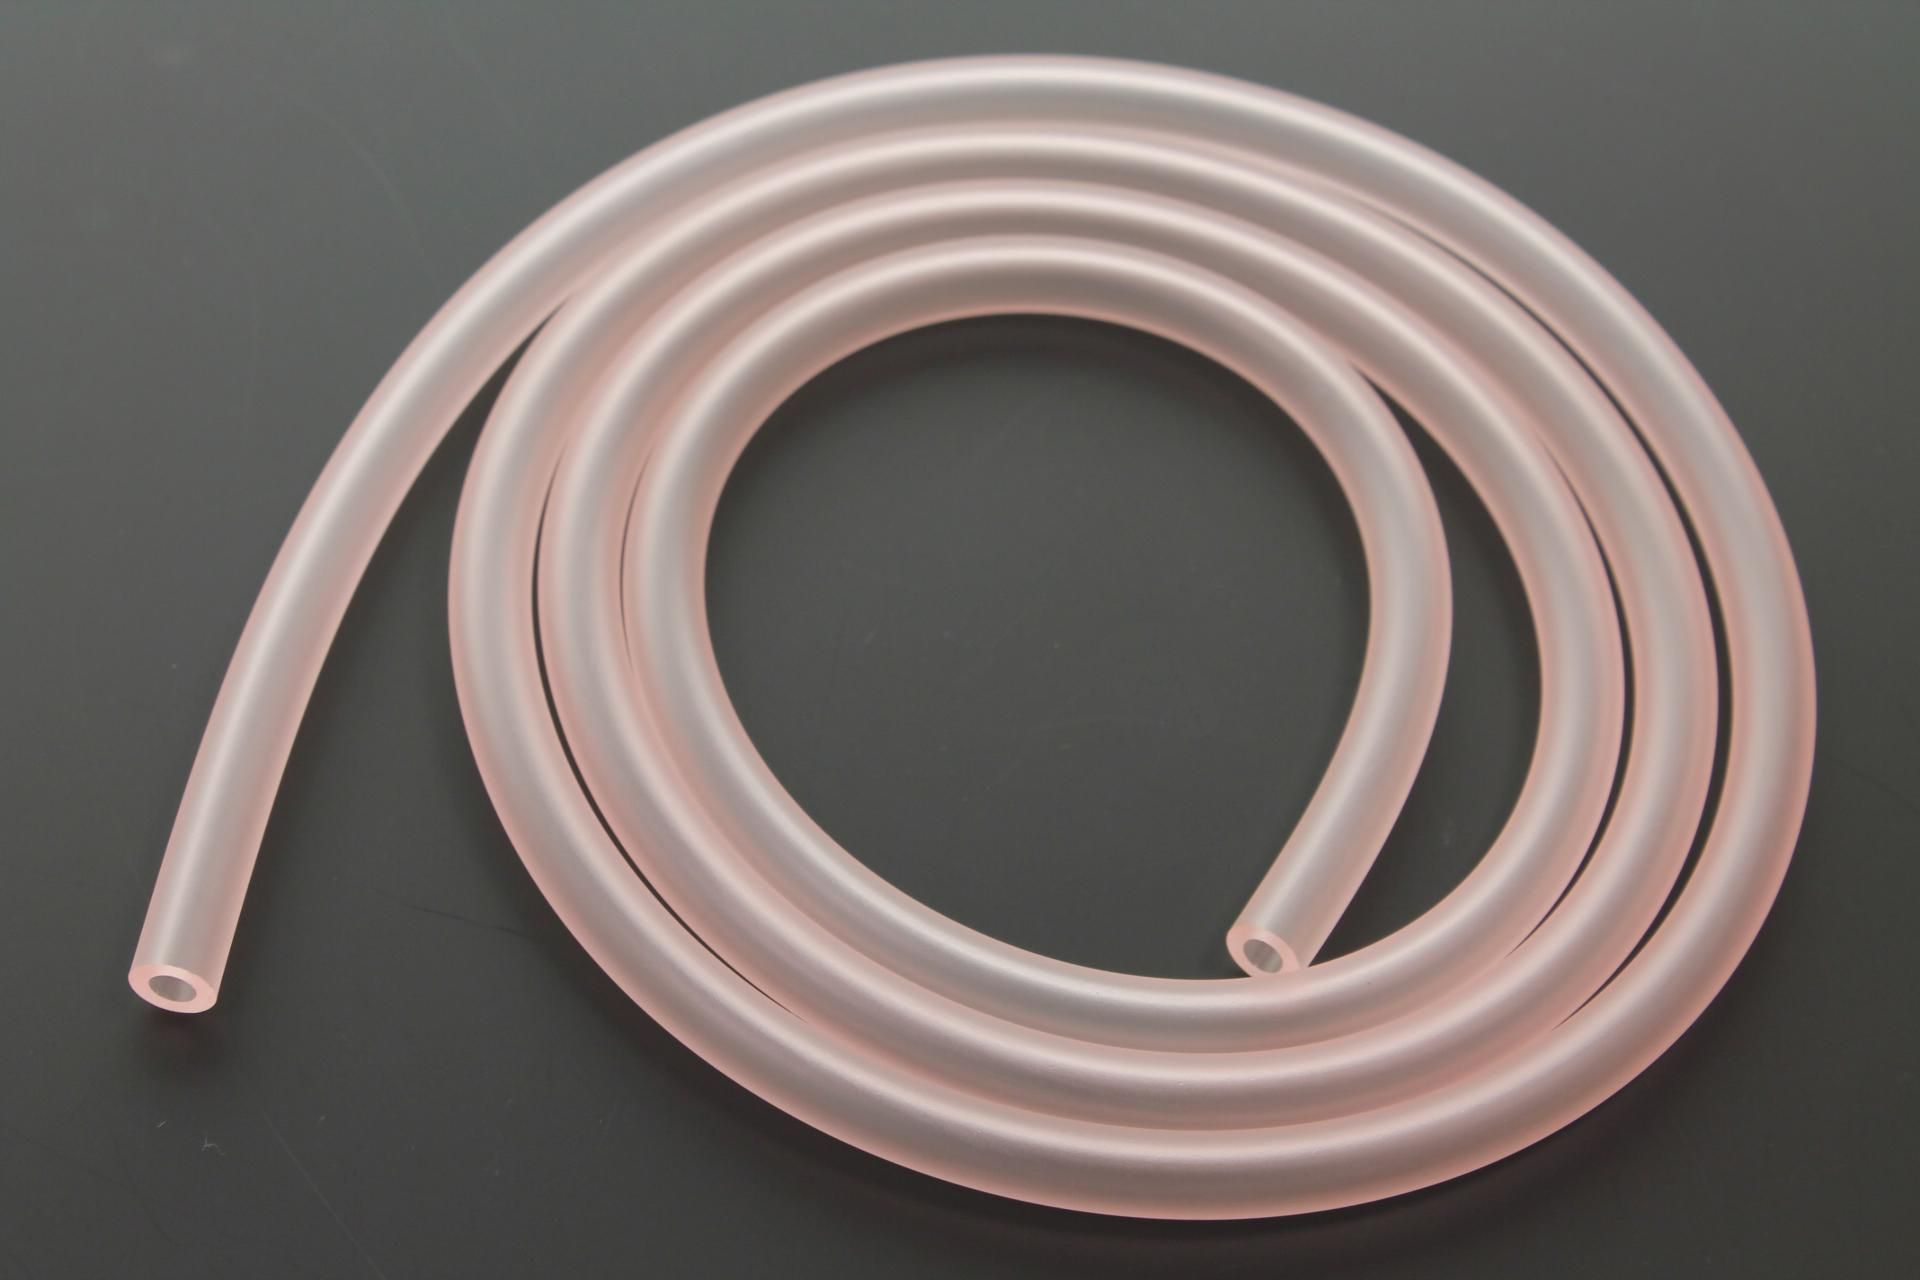 90446-09066-00 Superseded by 91A20-05145-00 - TUBE, FLEXIBLE